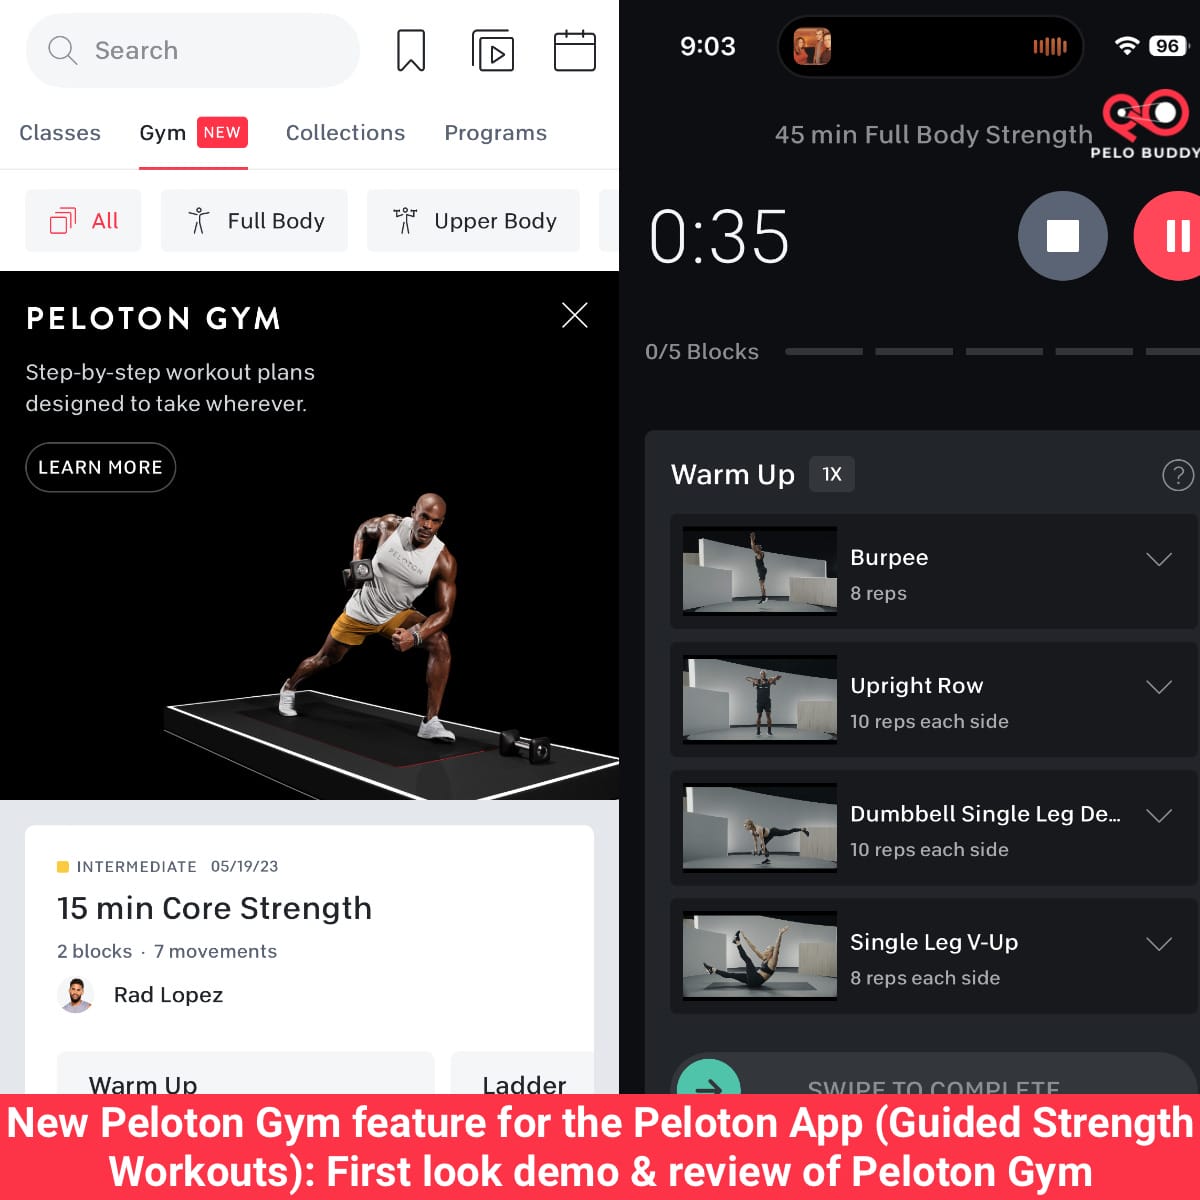 New Peloton Gym feature for the Peloton App (Guided Strength Workouts):  First look demo & review of Peloton Gym - Peloton Buddy